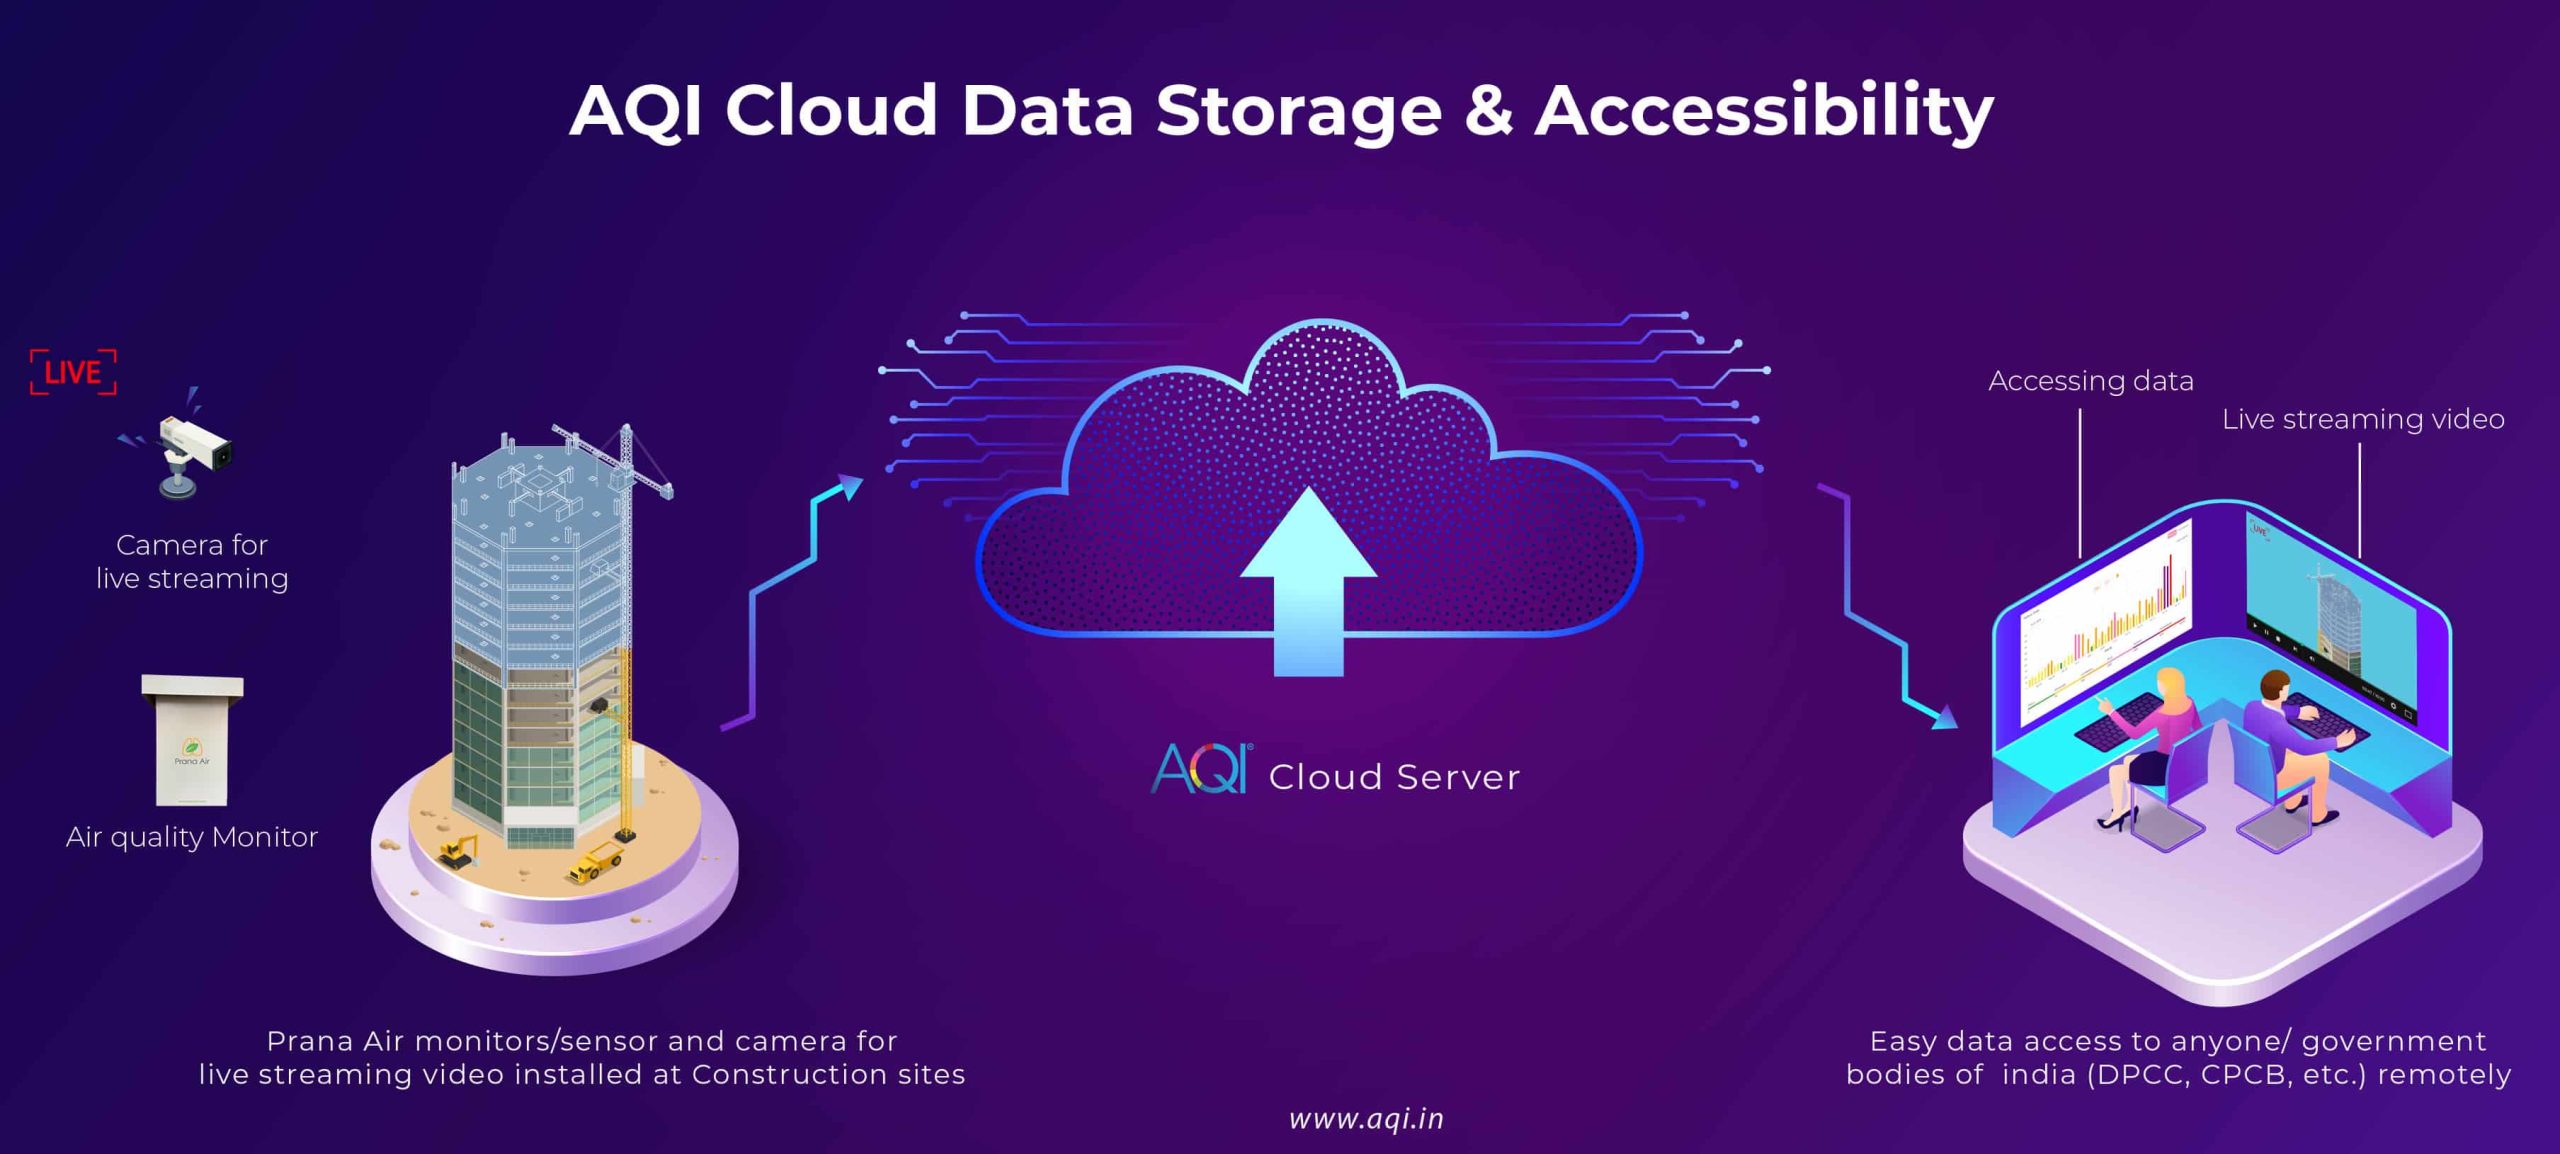 aqi cloud data storage accessibility process for construction pollution